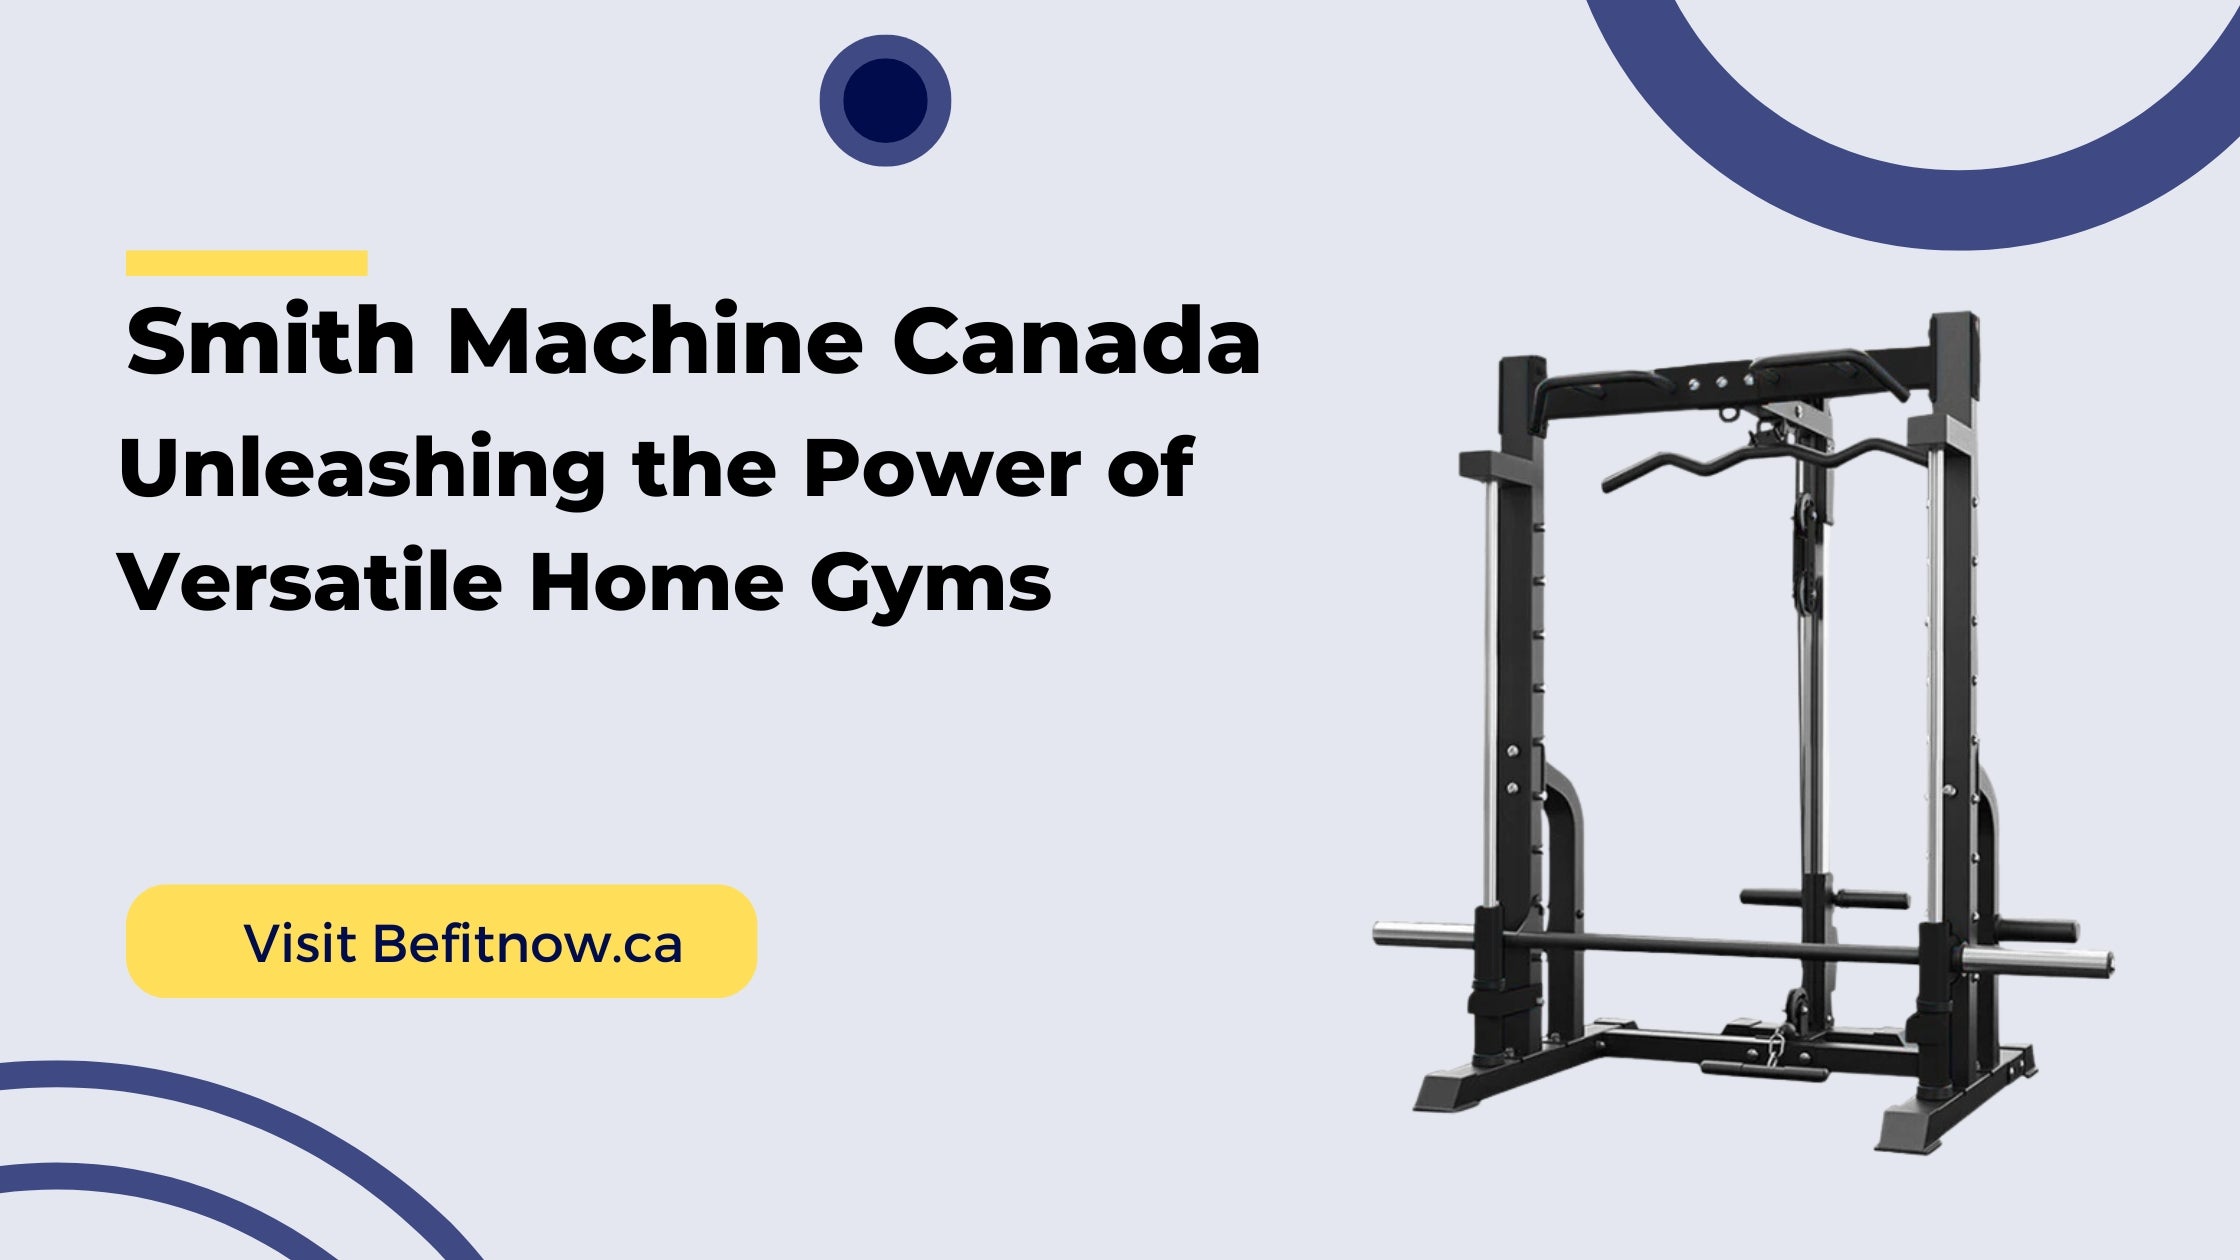 Smith Machine Canada: Unleashing the Power of Versatile Home Gyms